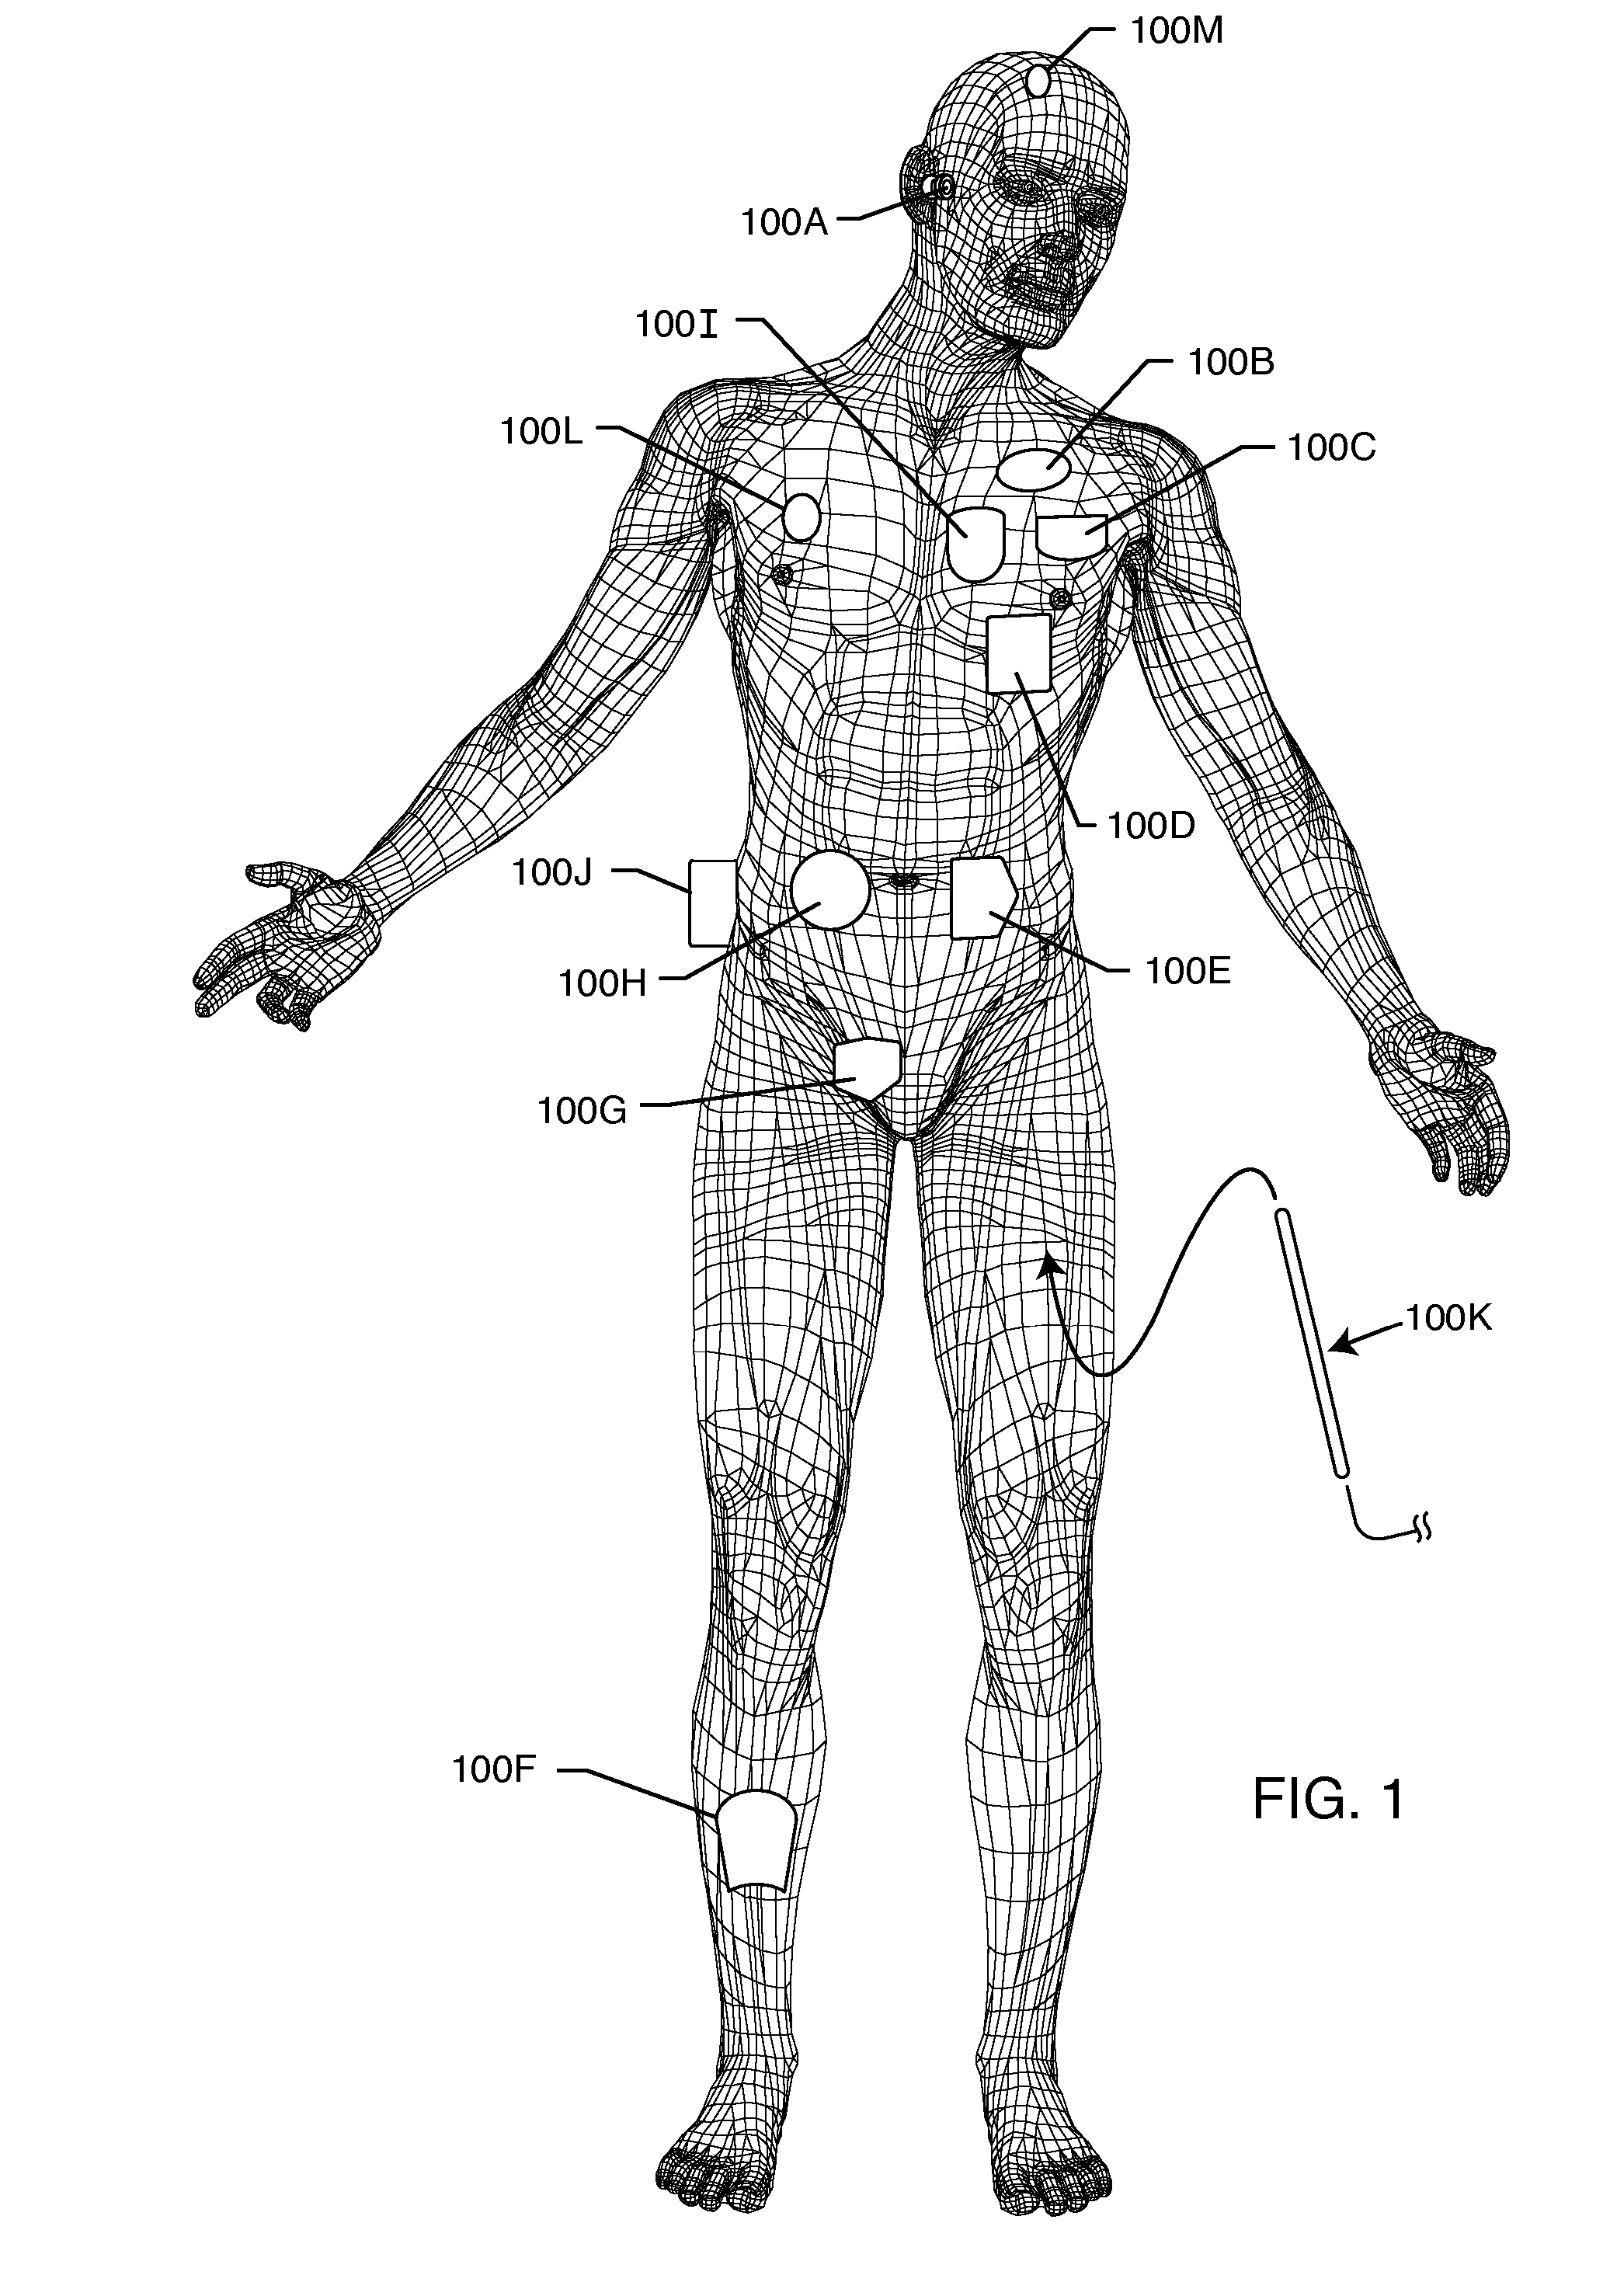 Implantable lead with a band stop filter having a capacitor in parallel with an inductor embedded in a dielectric body